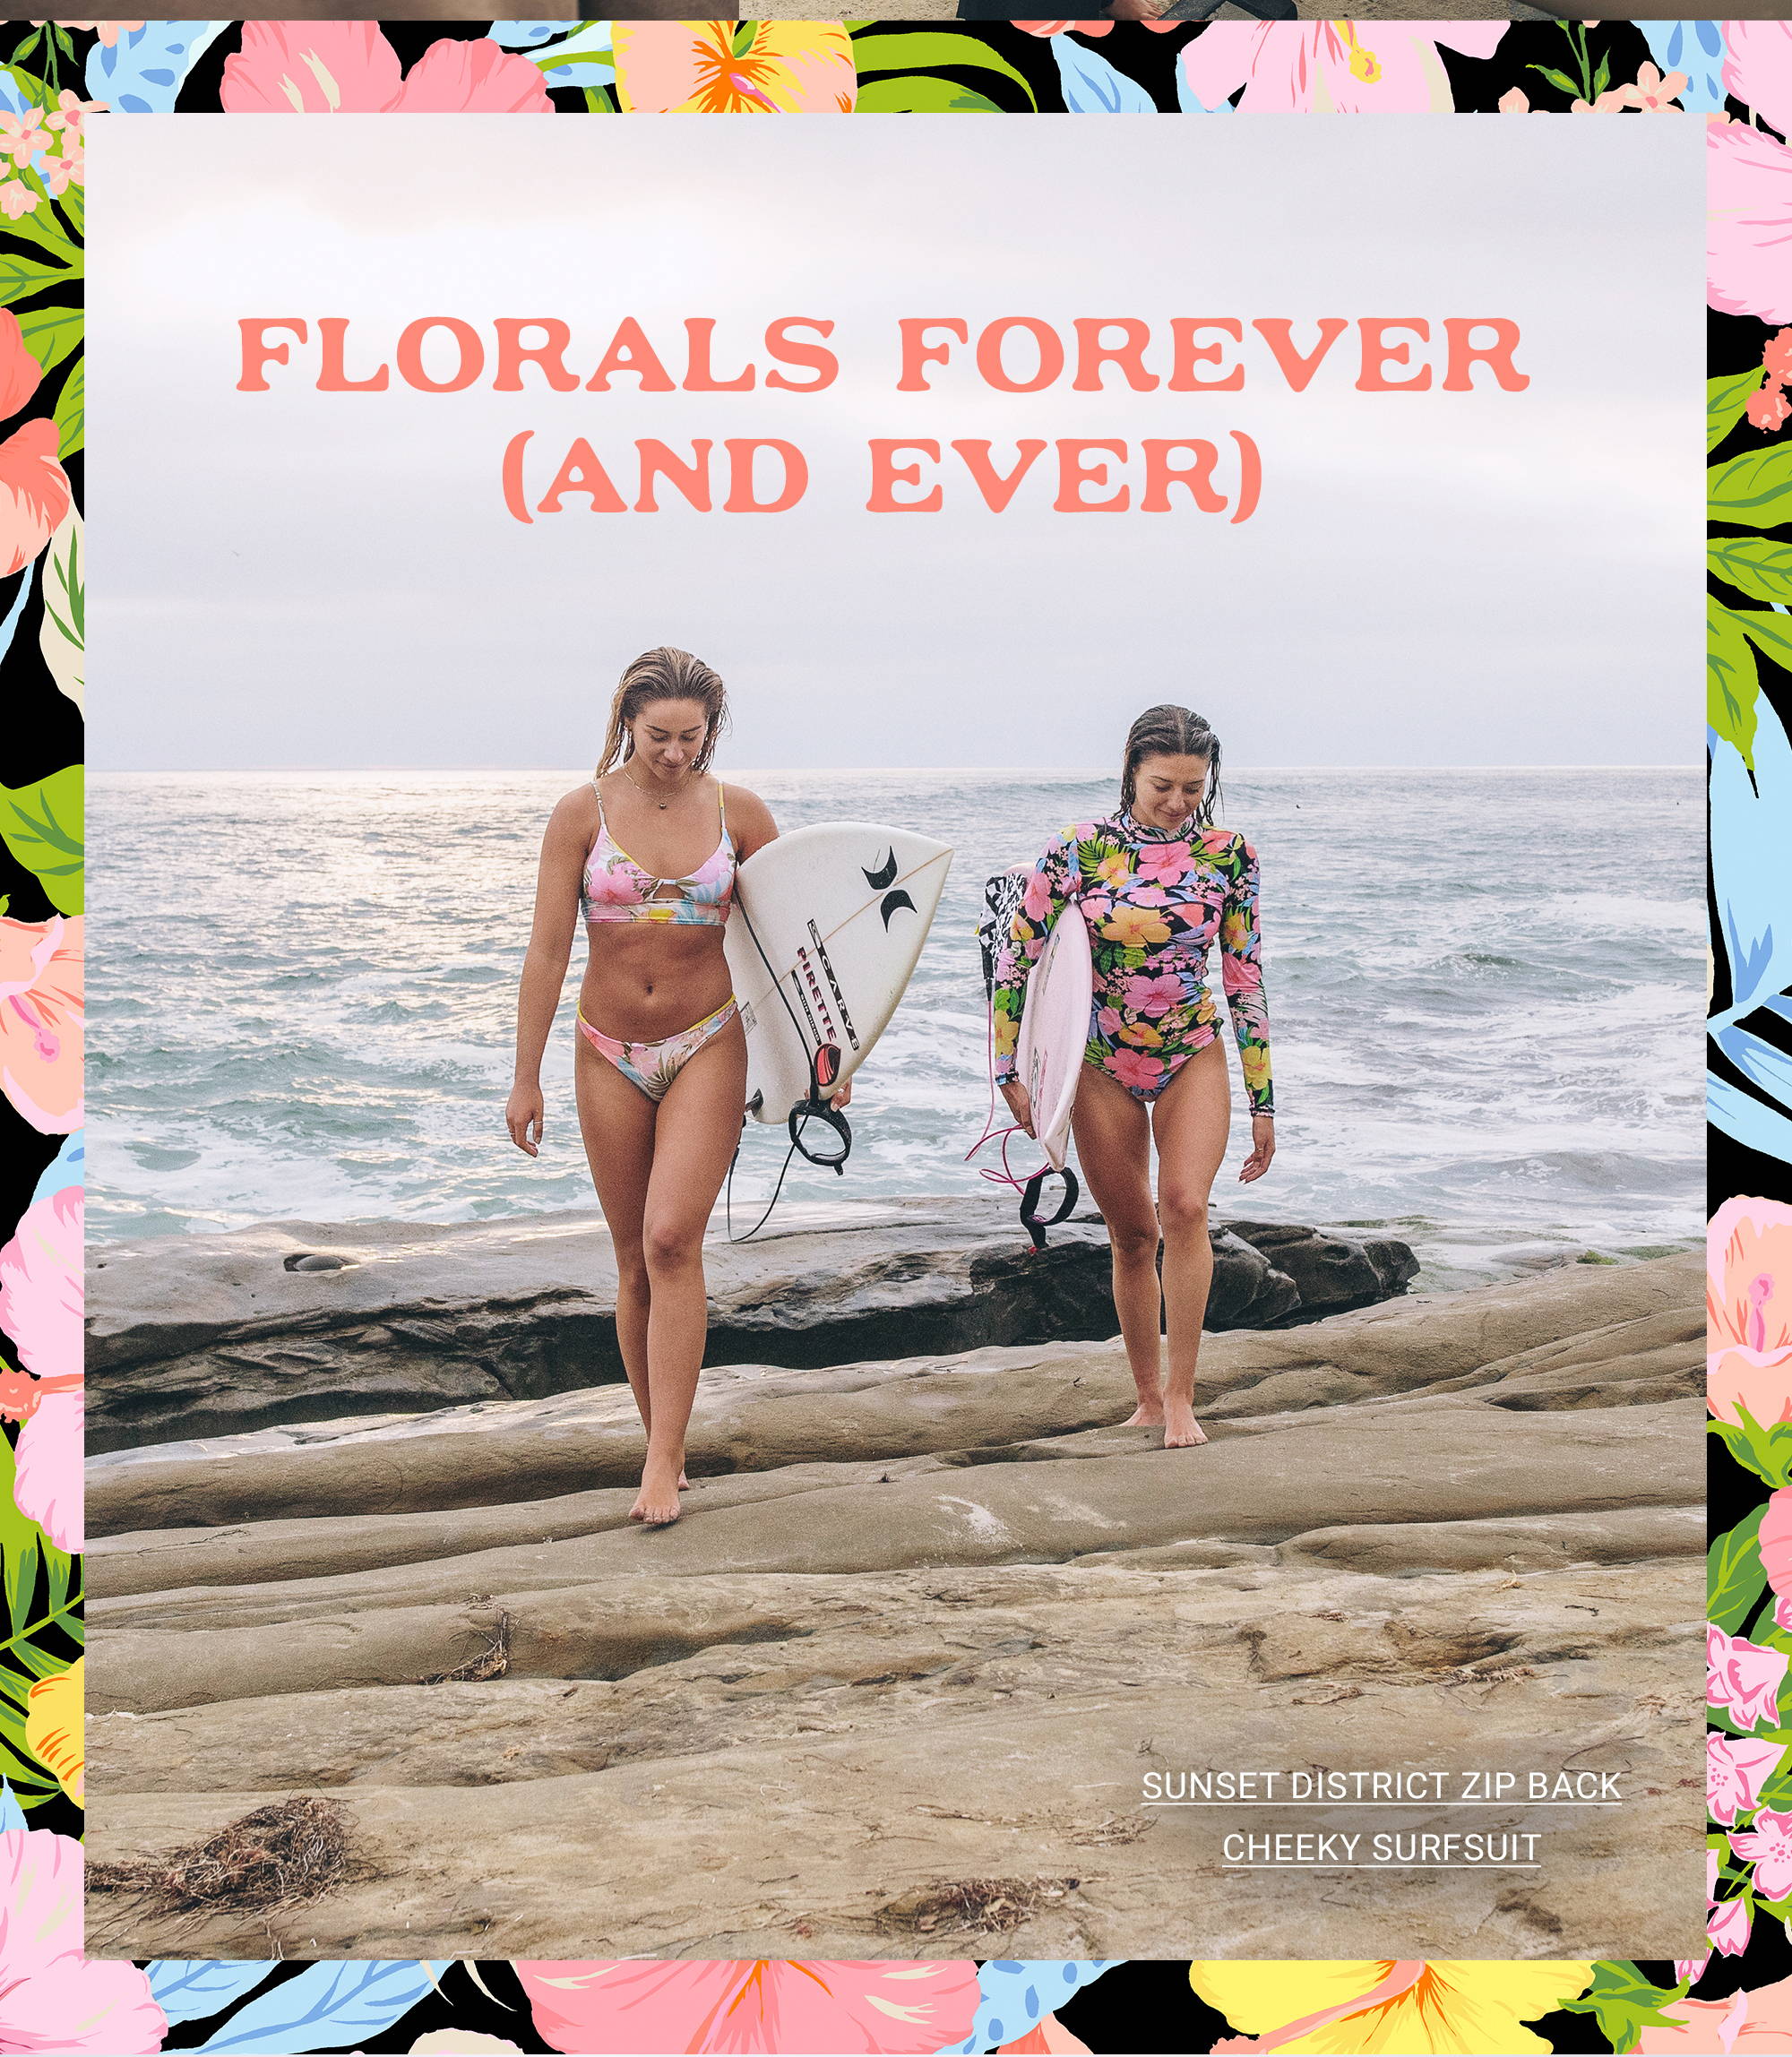 FLORALS FOREVER (AND EVER) SUNSET DISTRICT ZIP BACK CHEEKY SURFSUIT